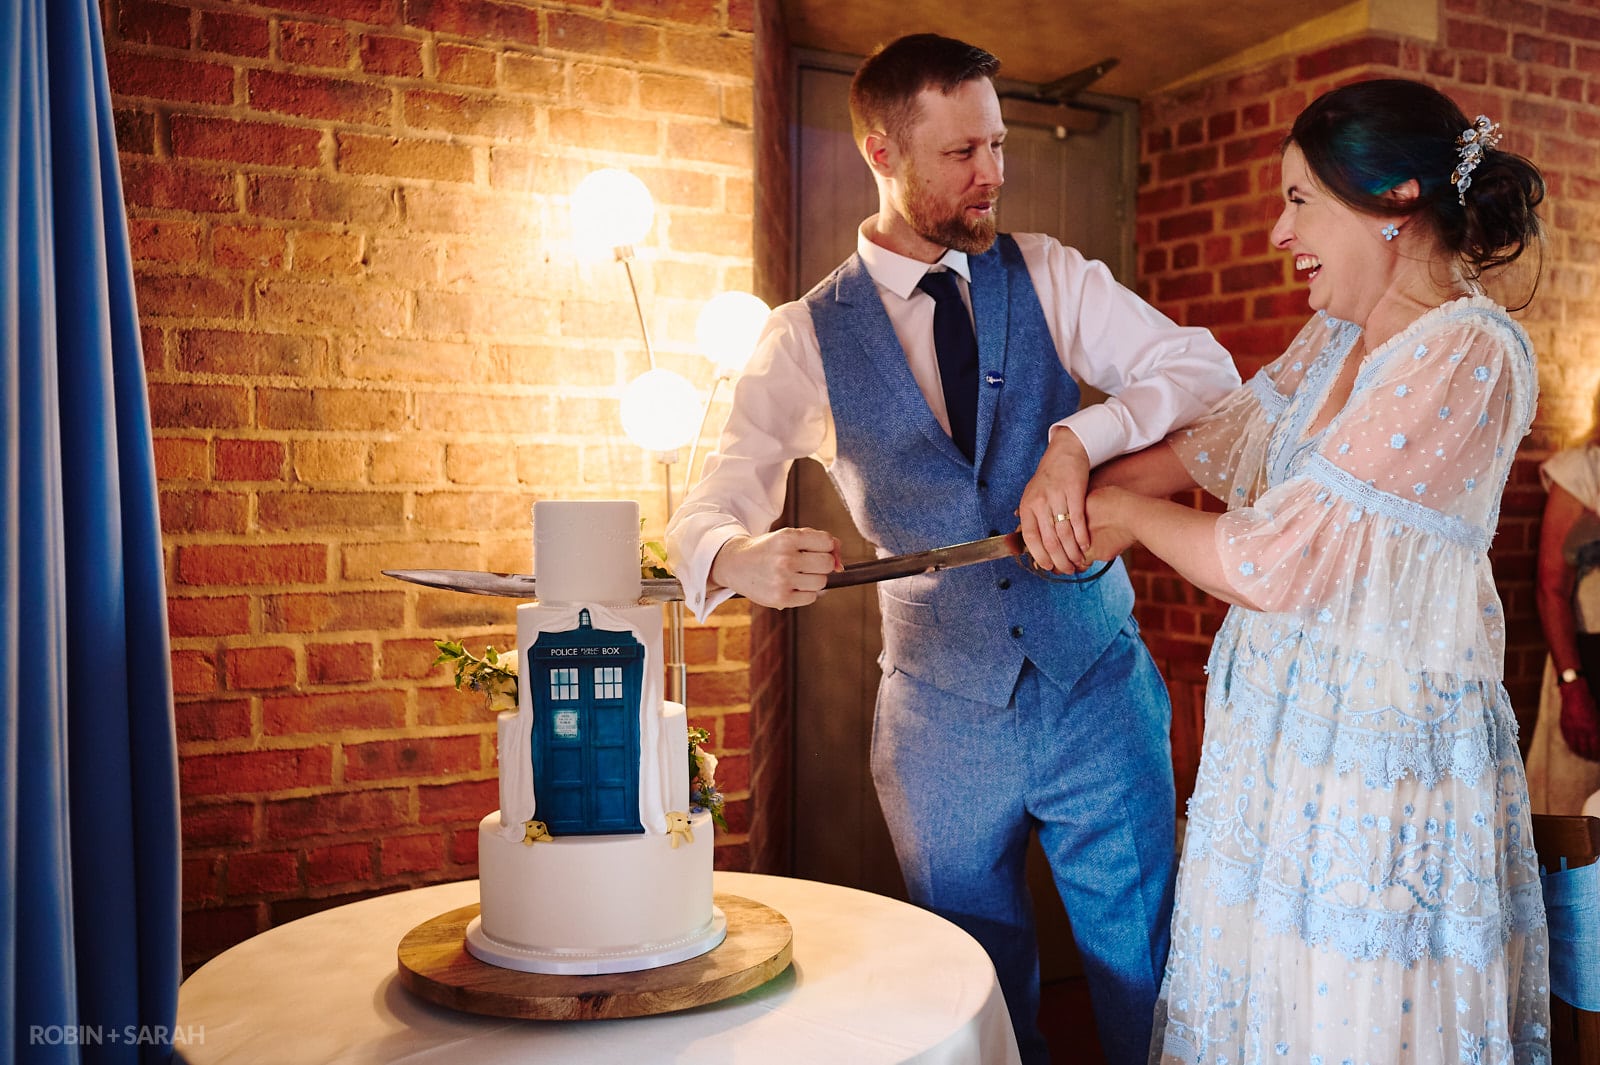 Bride and groom cut wedding cake with curved sword